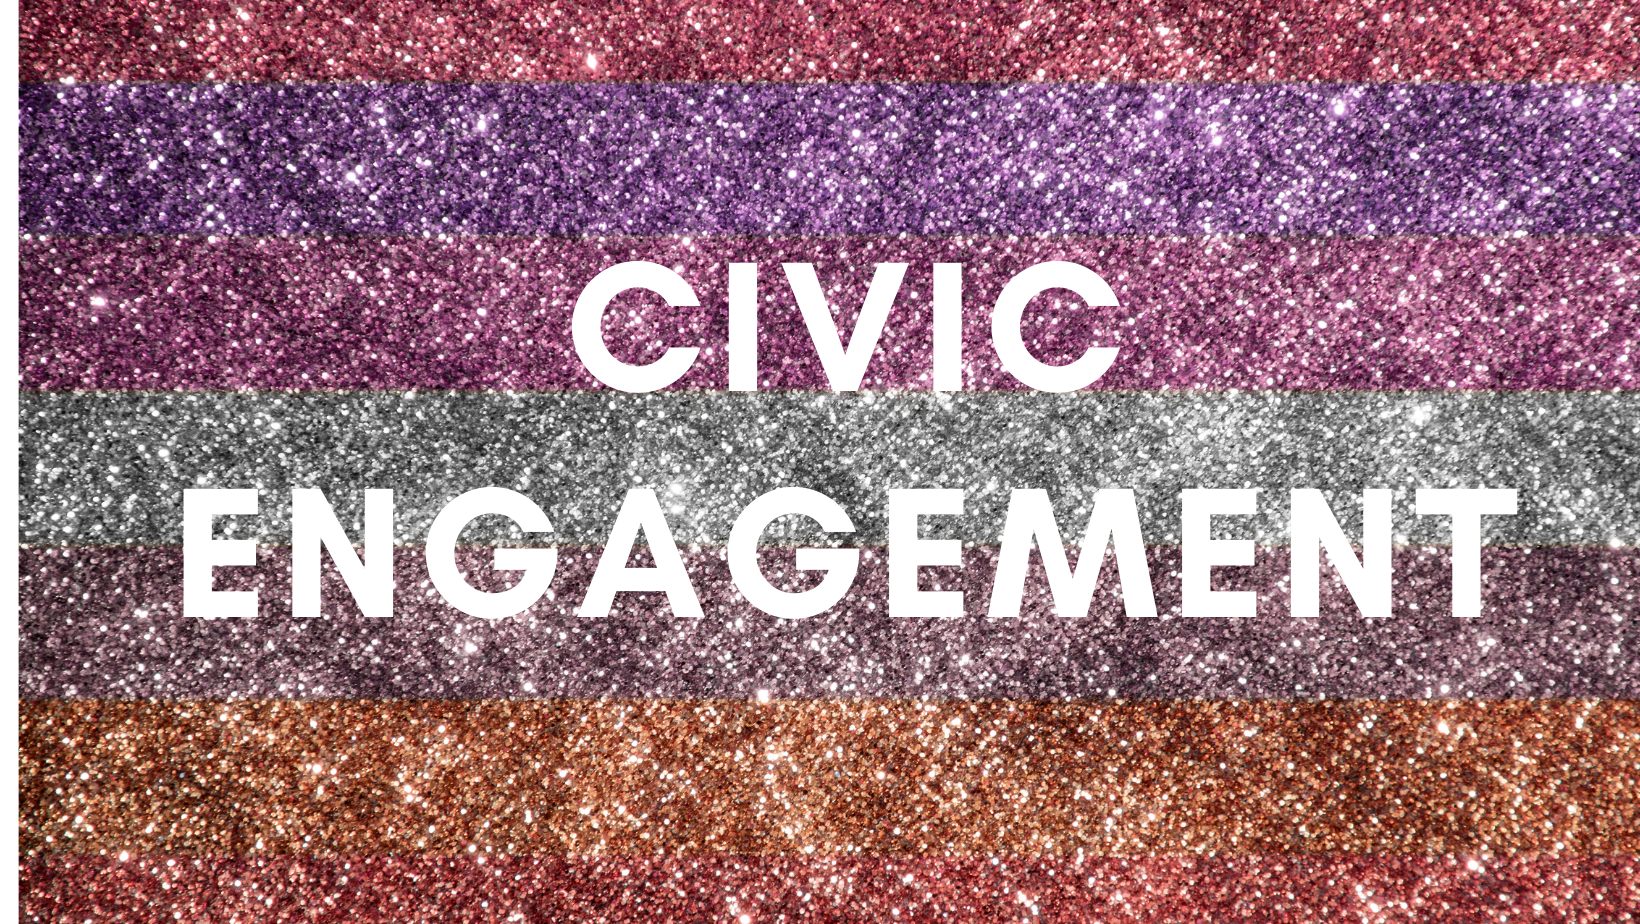 sparkle background with white text "civic engagement"